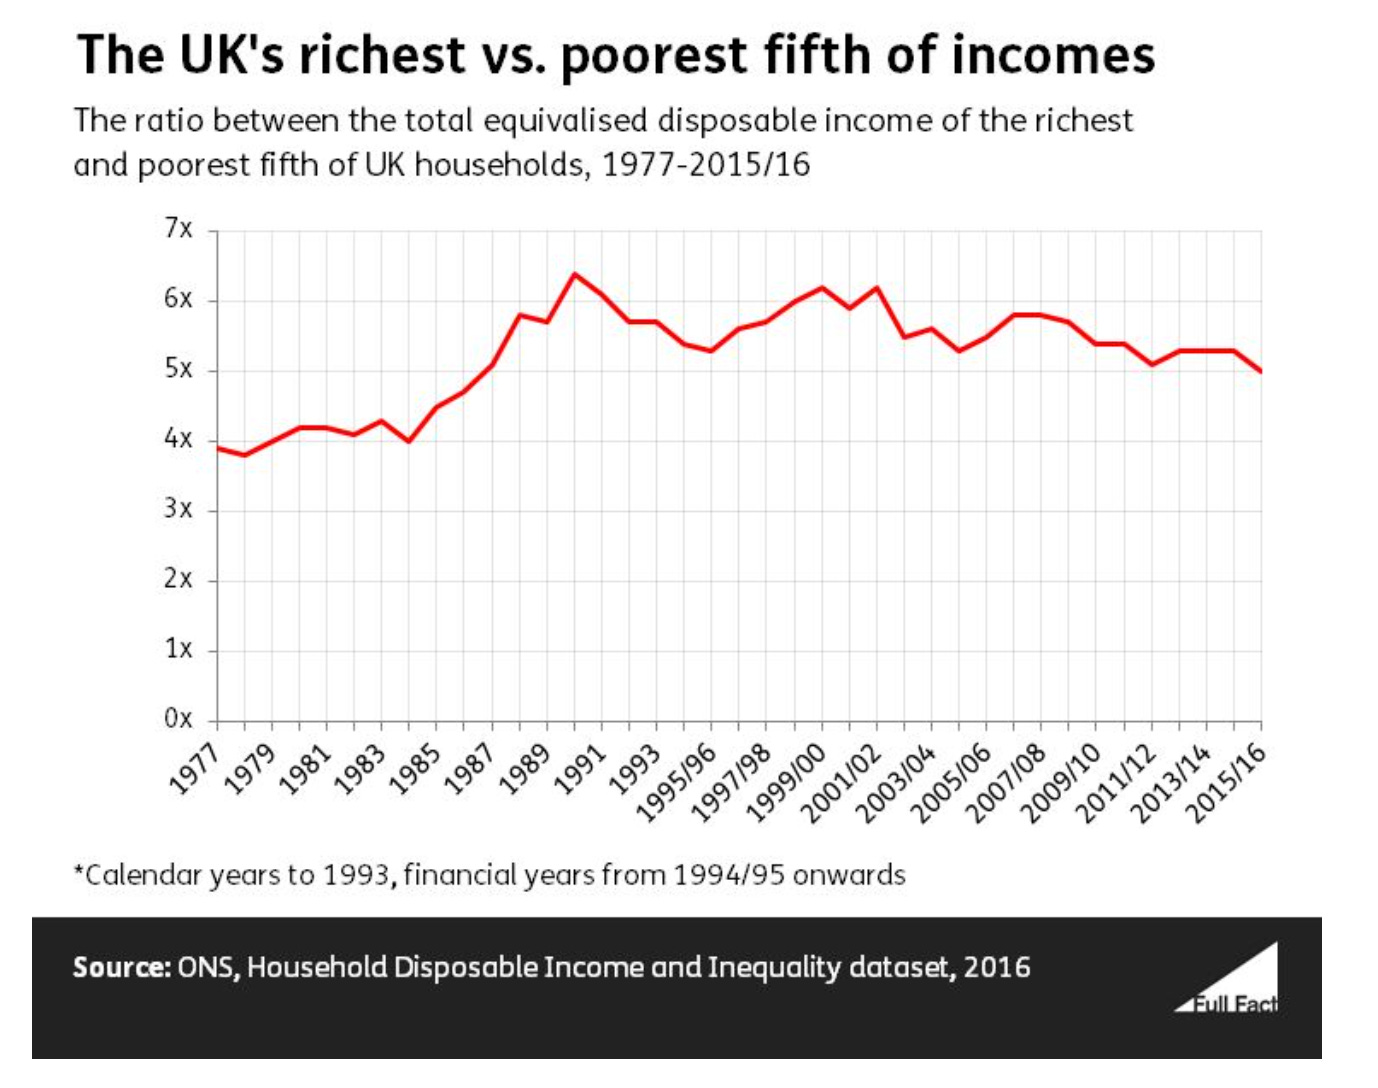 graph showing inequality increasing in the UK from 1977 to 2016